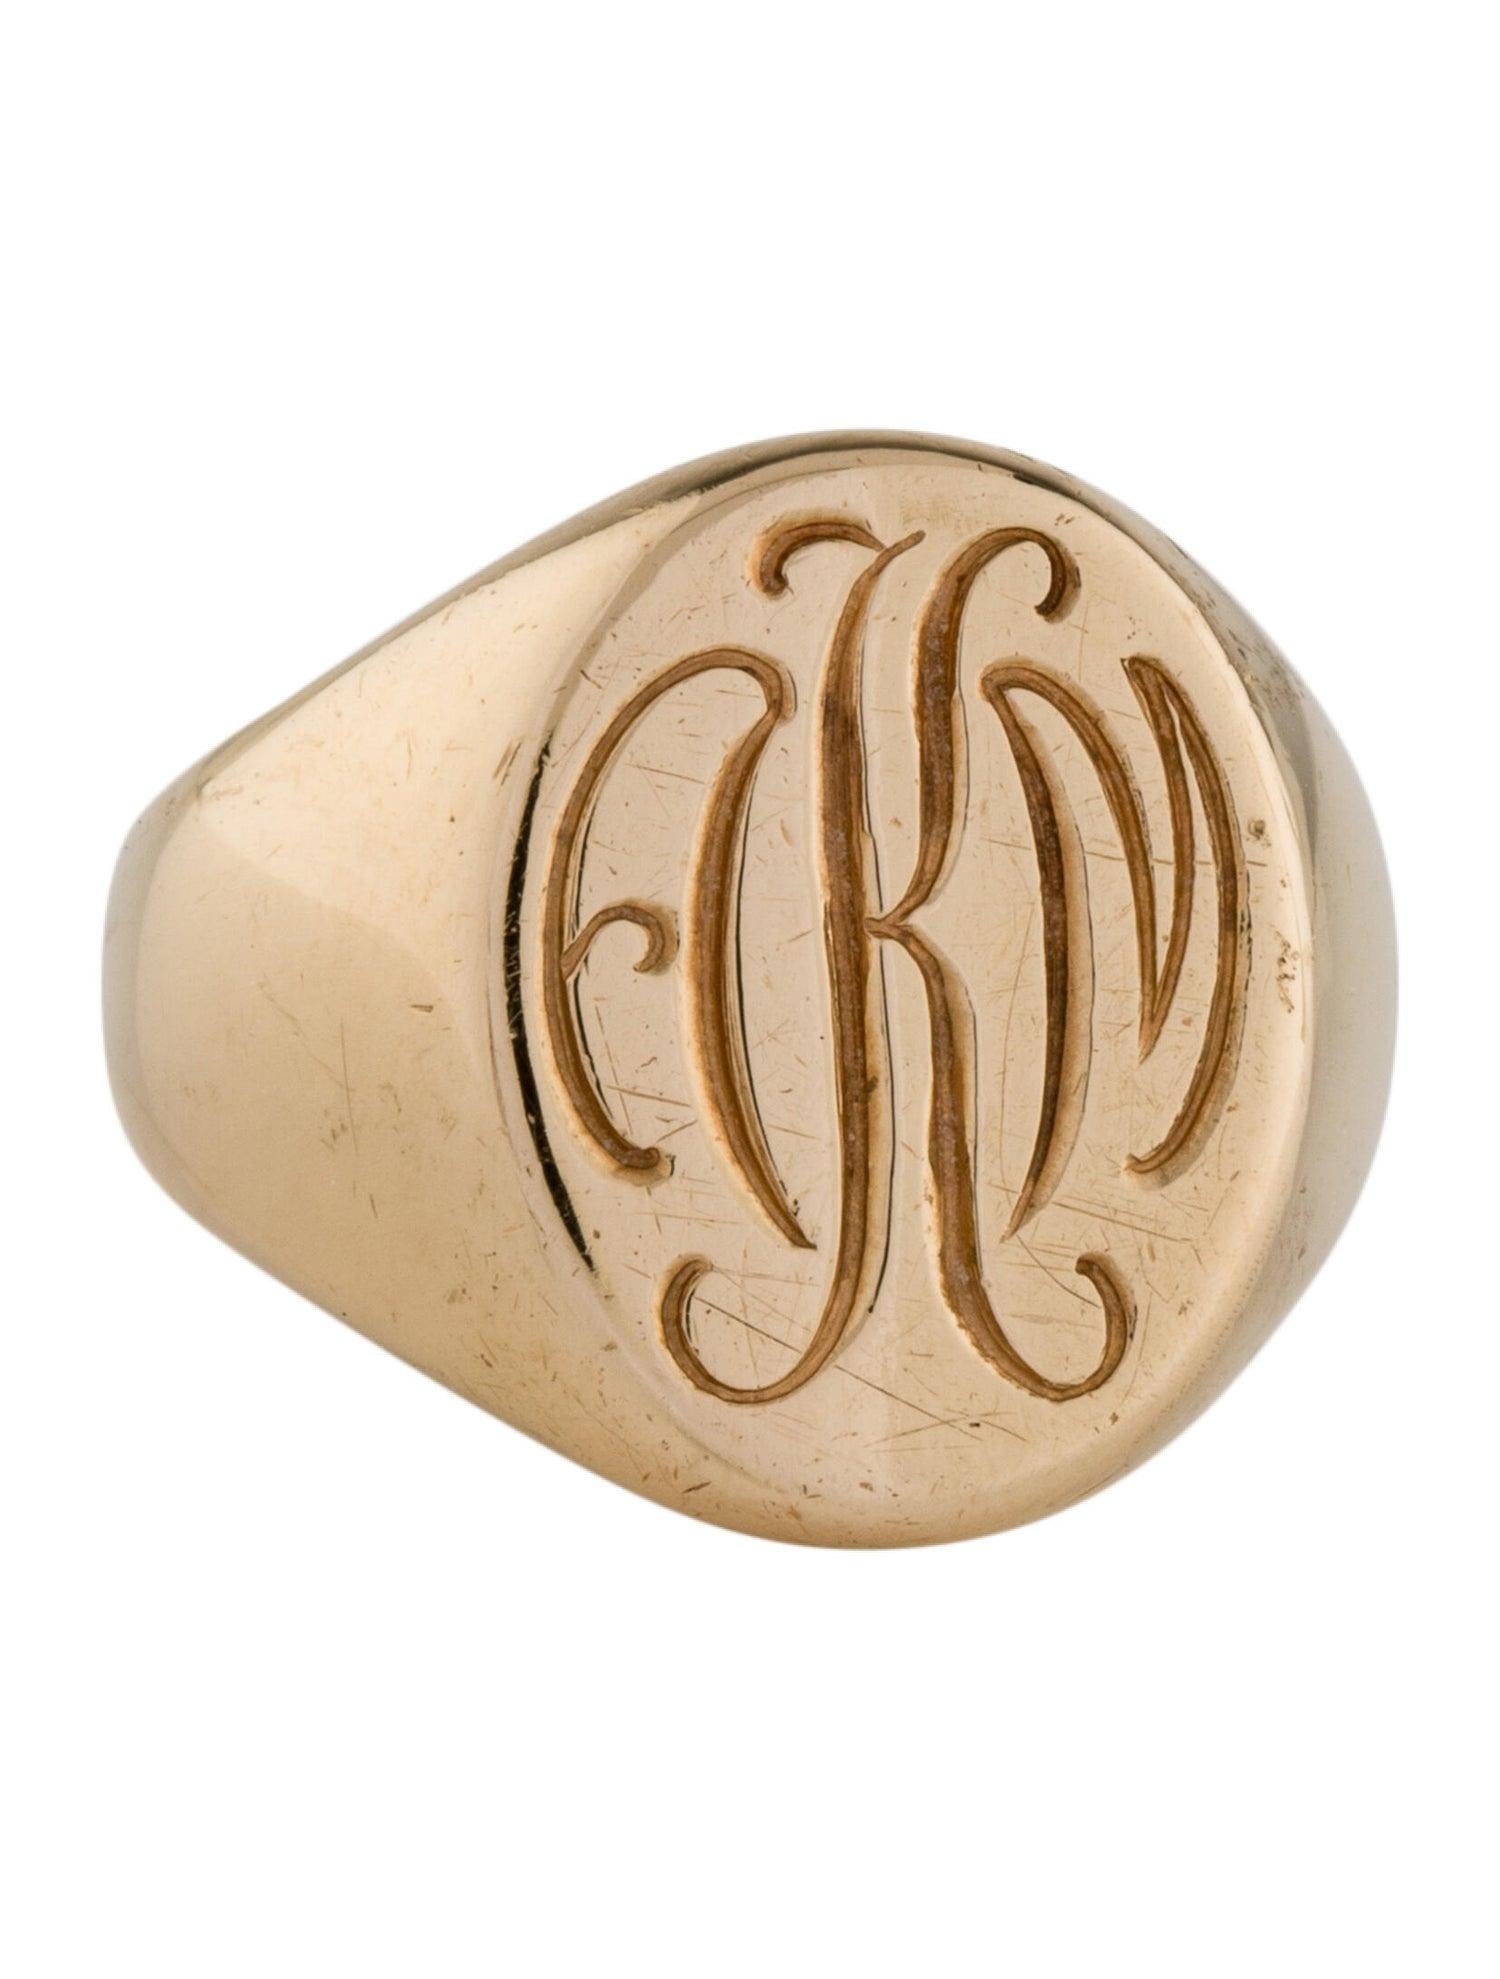 Tiffany & Co. Antique 14k Yellow Gold Signet Ring Rare


Here is your chance to purchase a beautiful and highly collectible designer signet ring.  Truly a great piece at a great price! 

Weight: 8.5 grams

Dimensions: 5/8